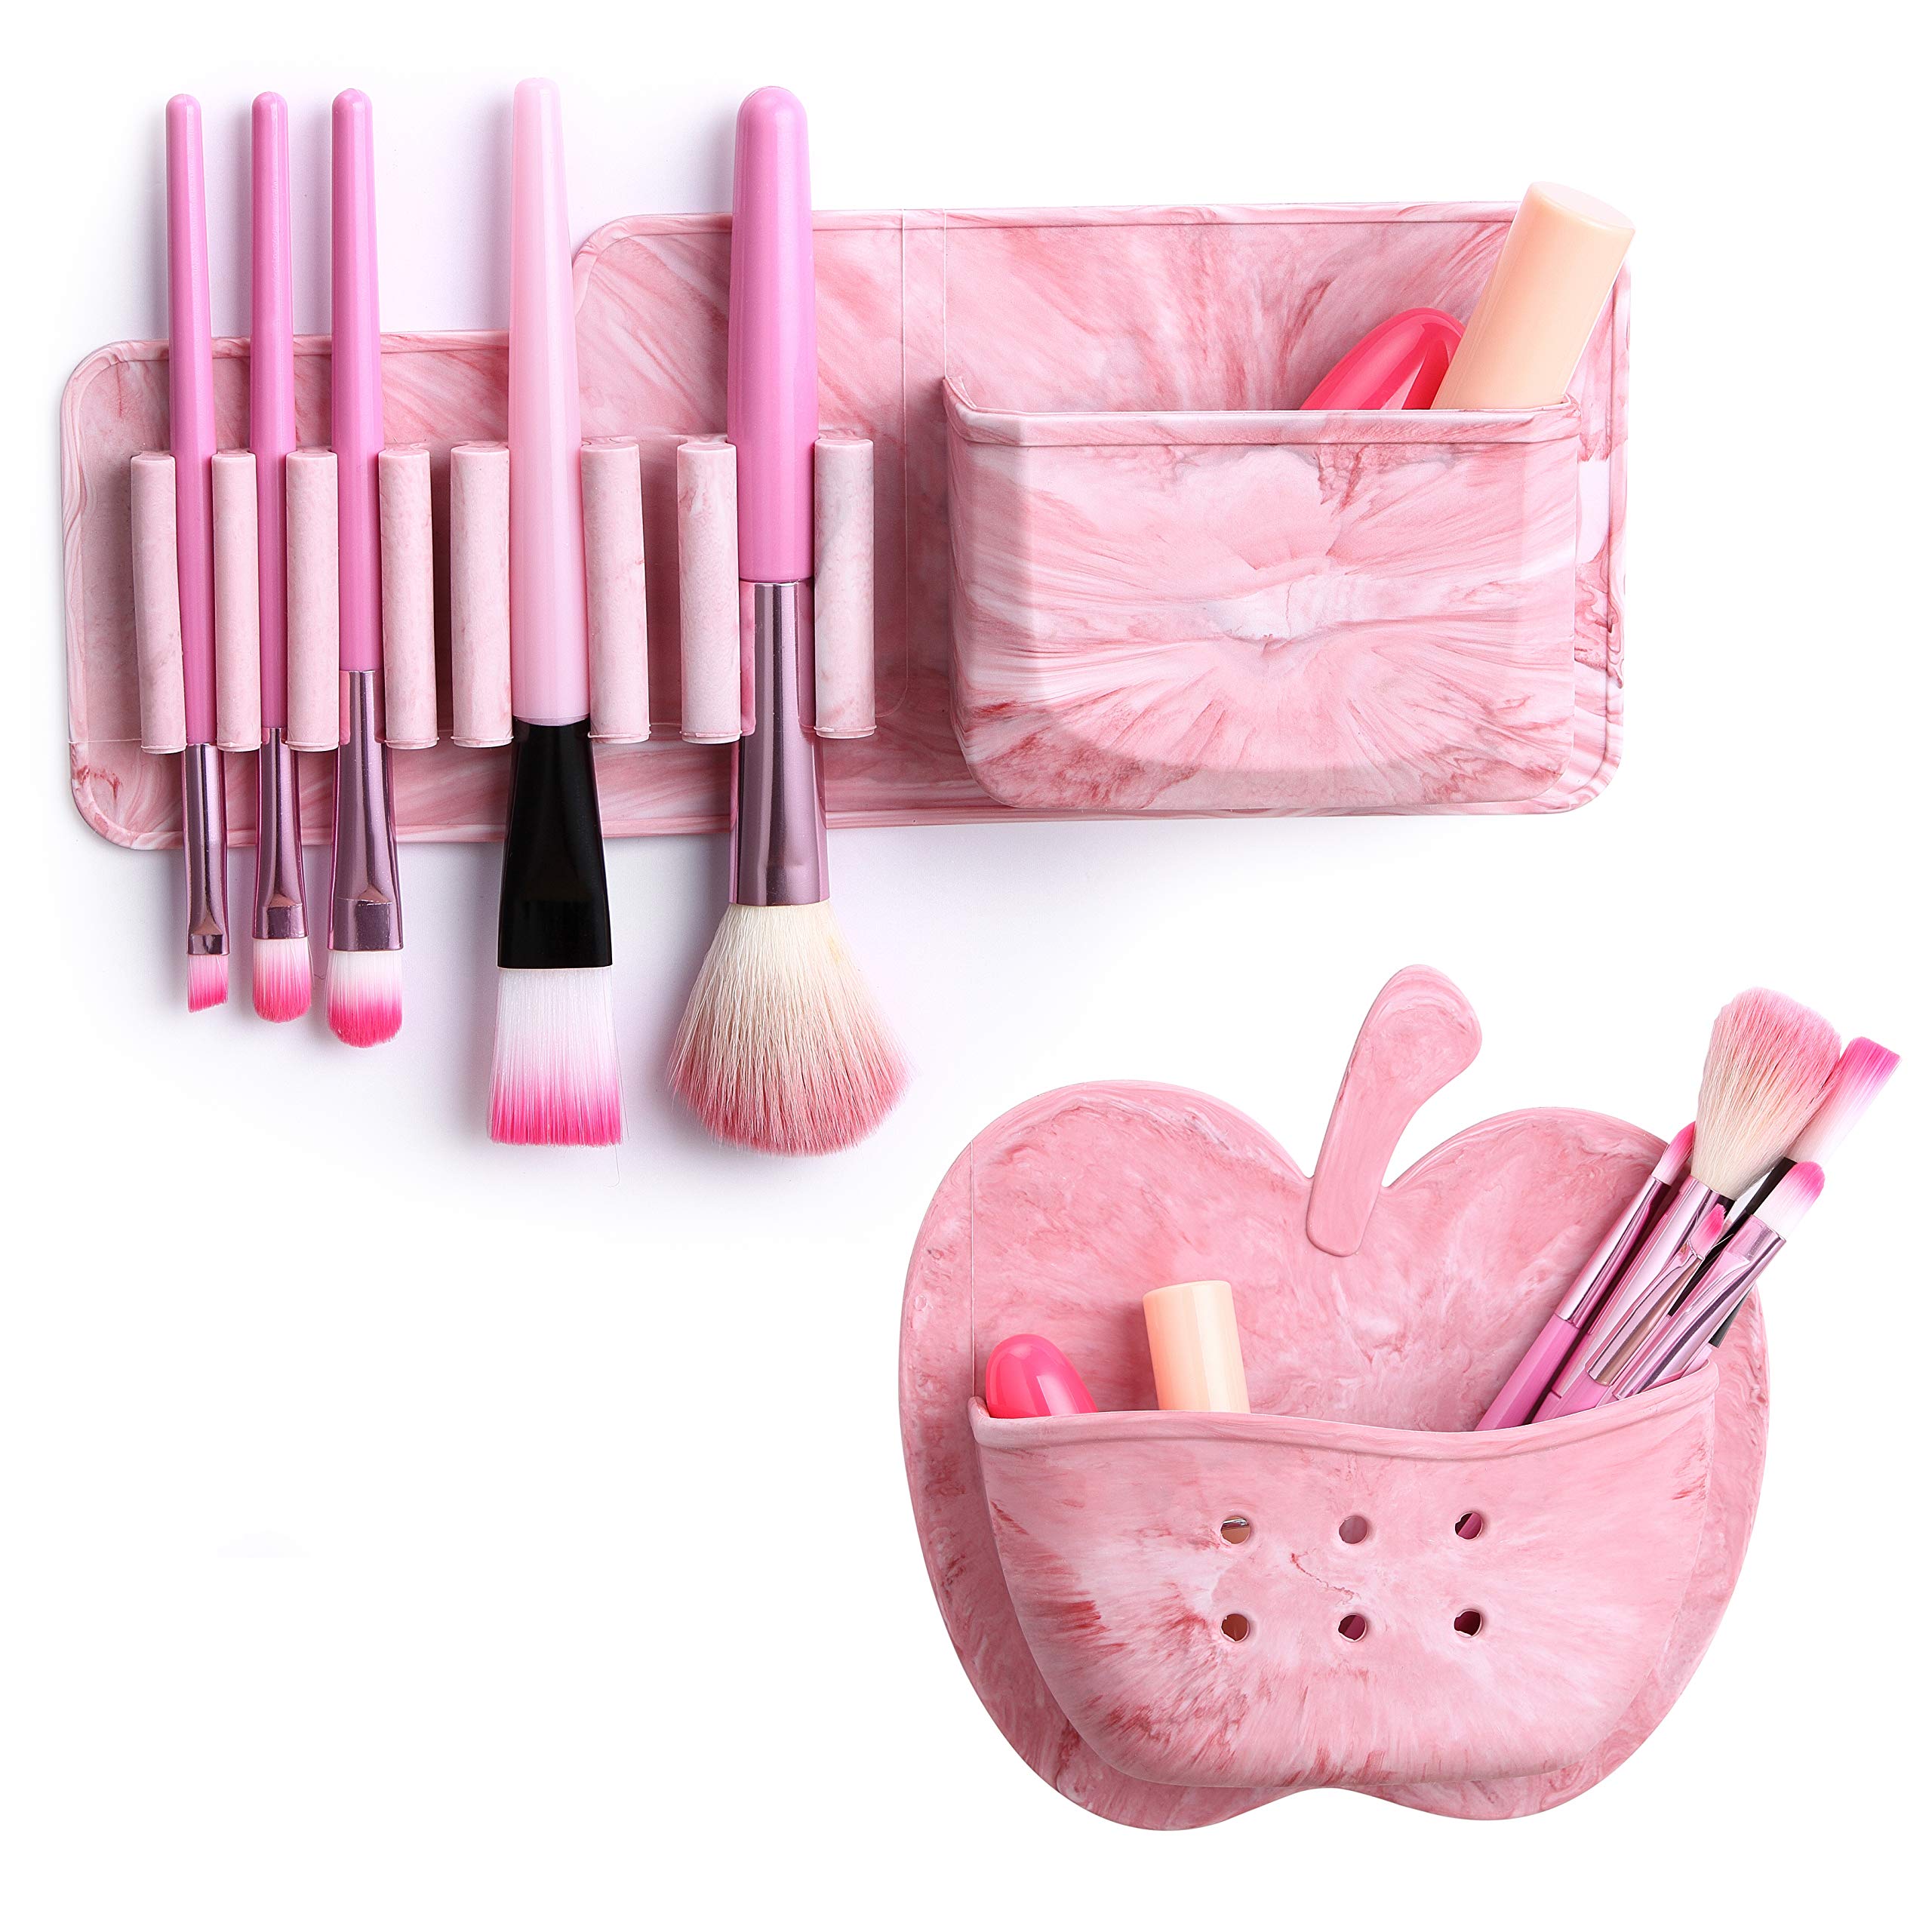 Arsty Portable Silicone Makeup Brush Holder Cosmetic Organizer (PINK)